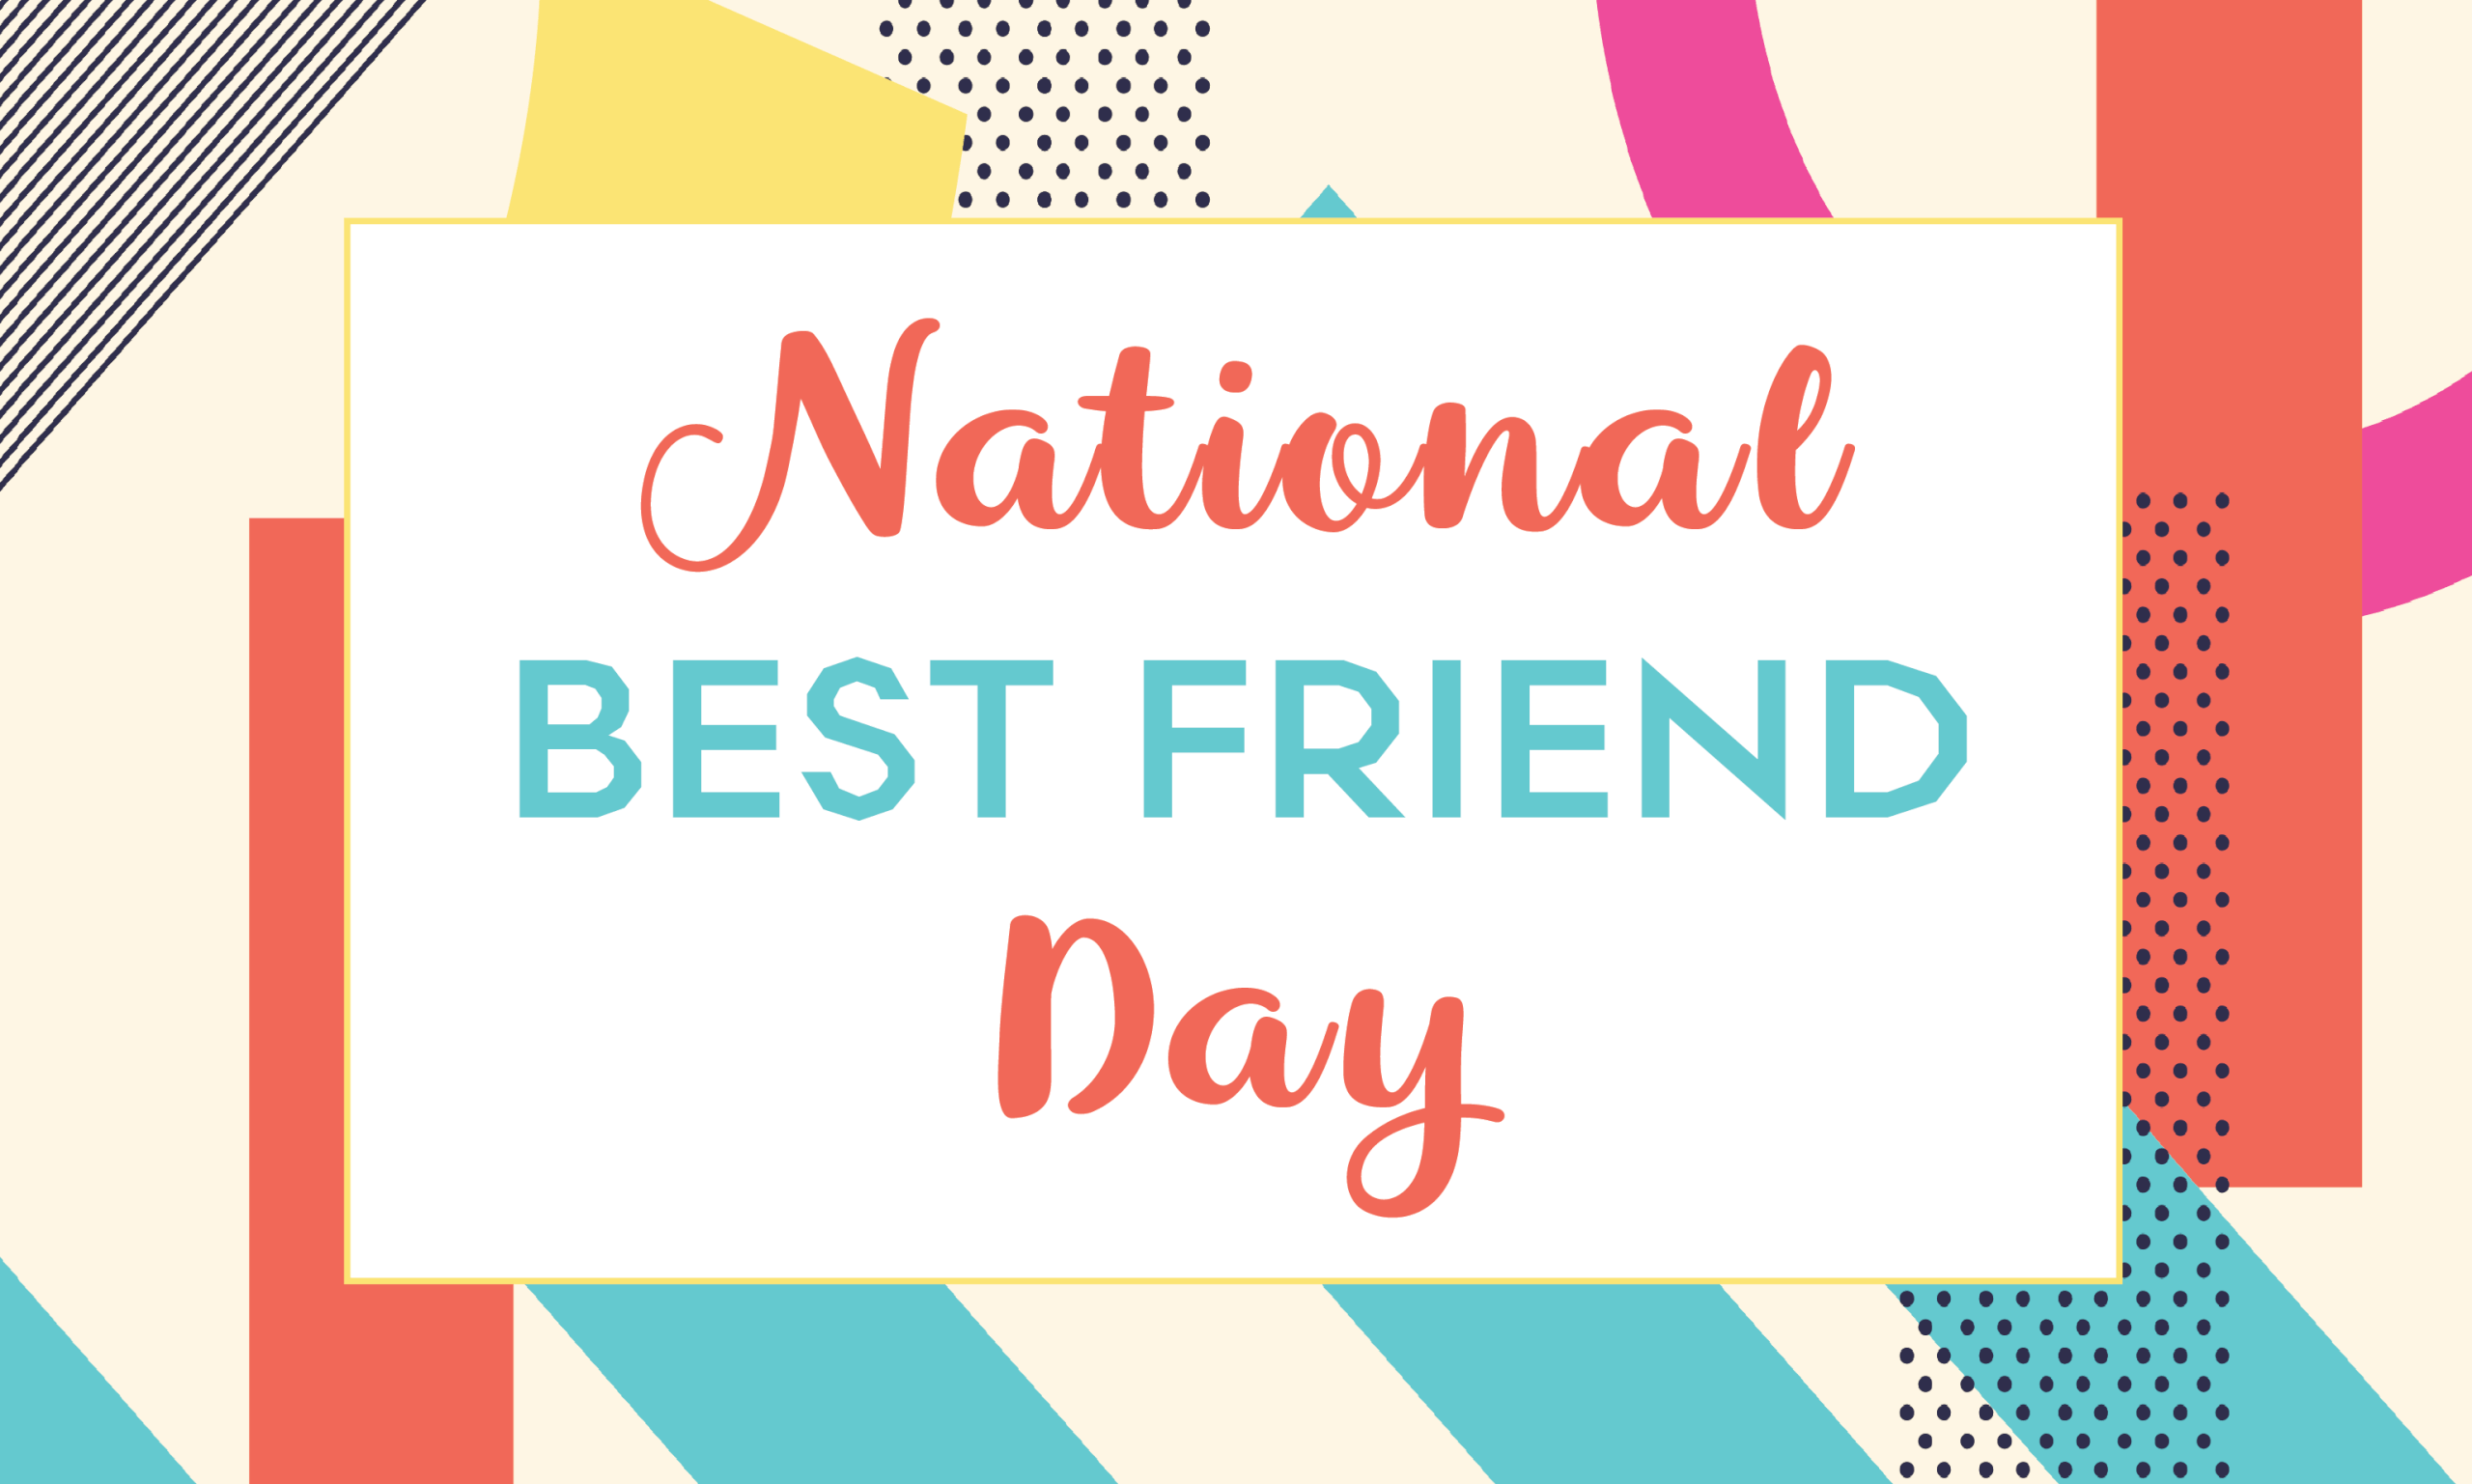 Bring Your BFF for National Best Friend Day